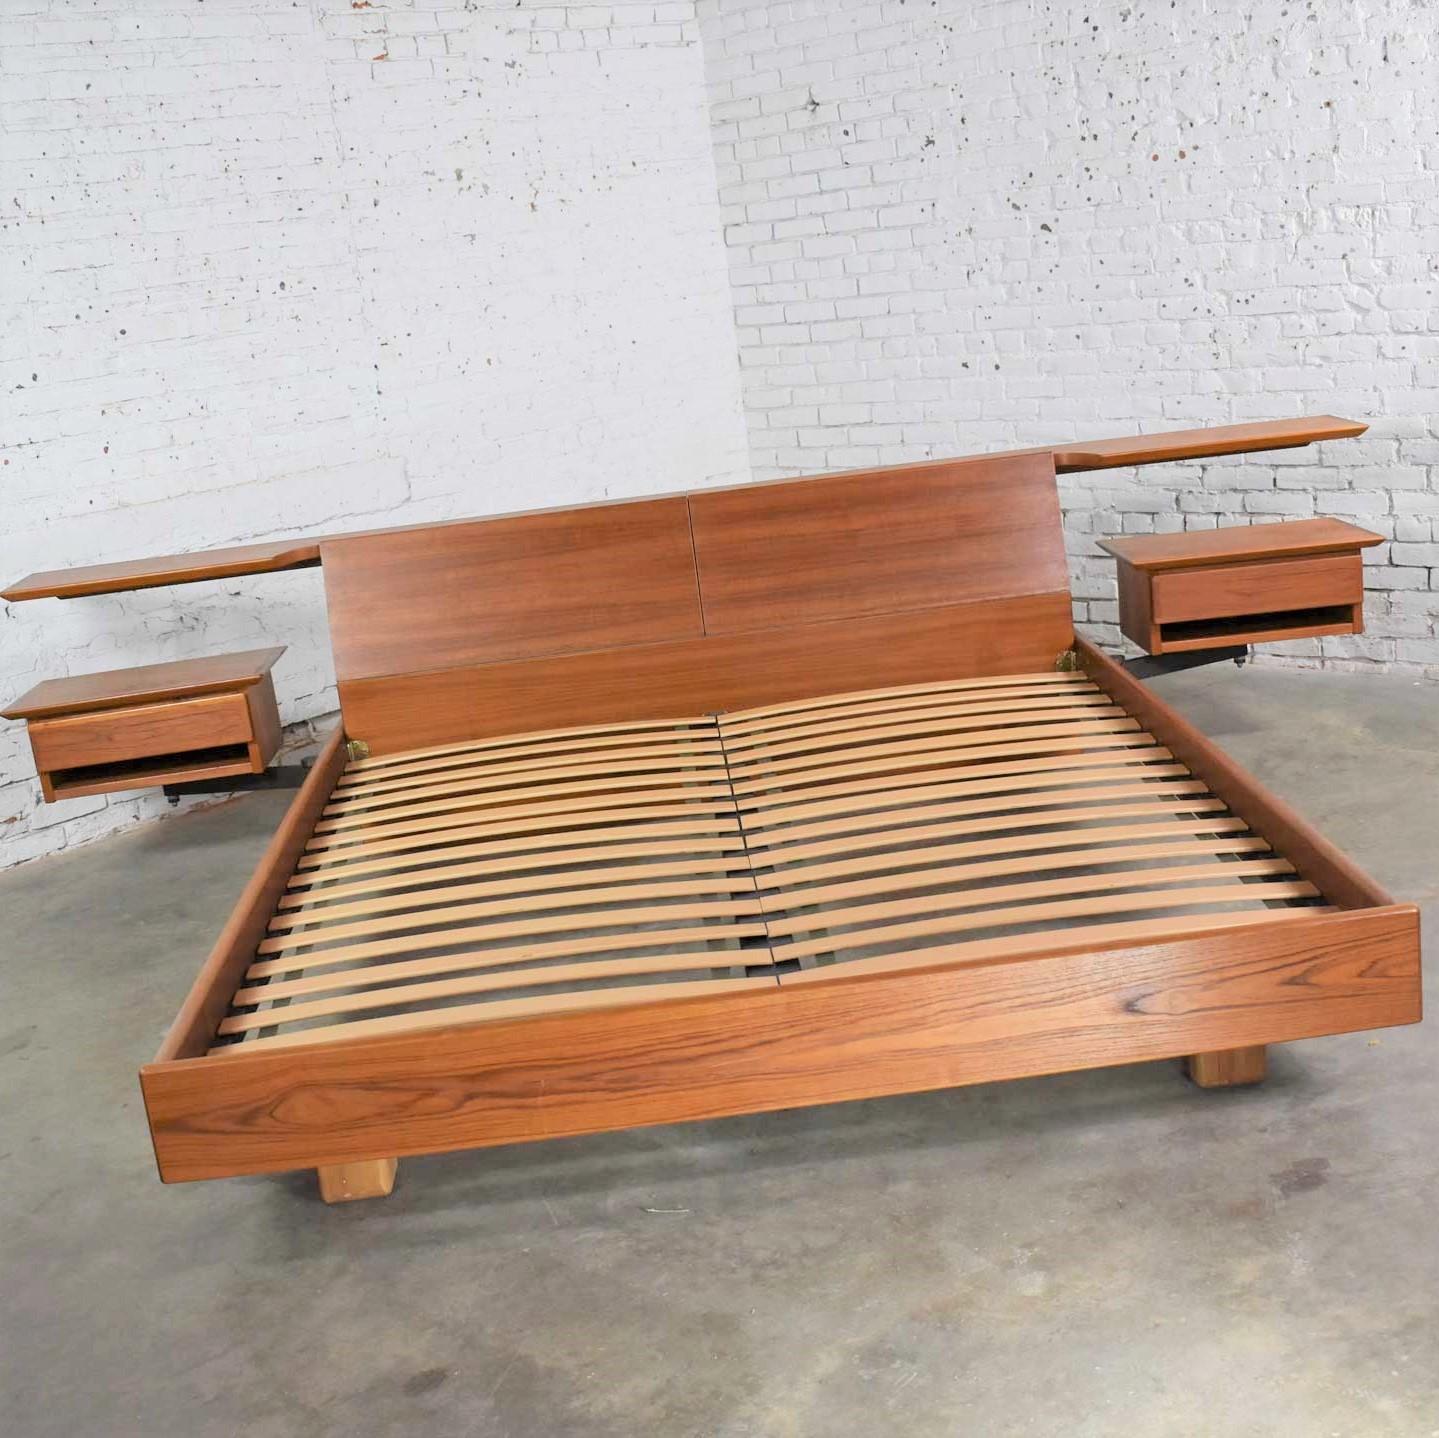 Handsome California king size Scandinavian Modern teak platform bed with flip out storage headboard and mounted swing-arm nightstands, by Dyrlund. It is in fabulous vintage condition apart from a hint of a water ring on one of the nightstand tops.